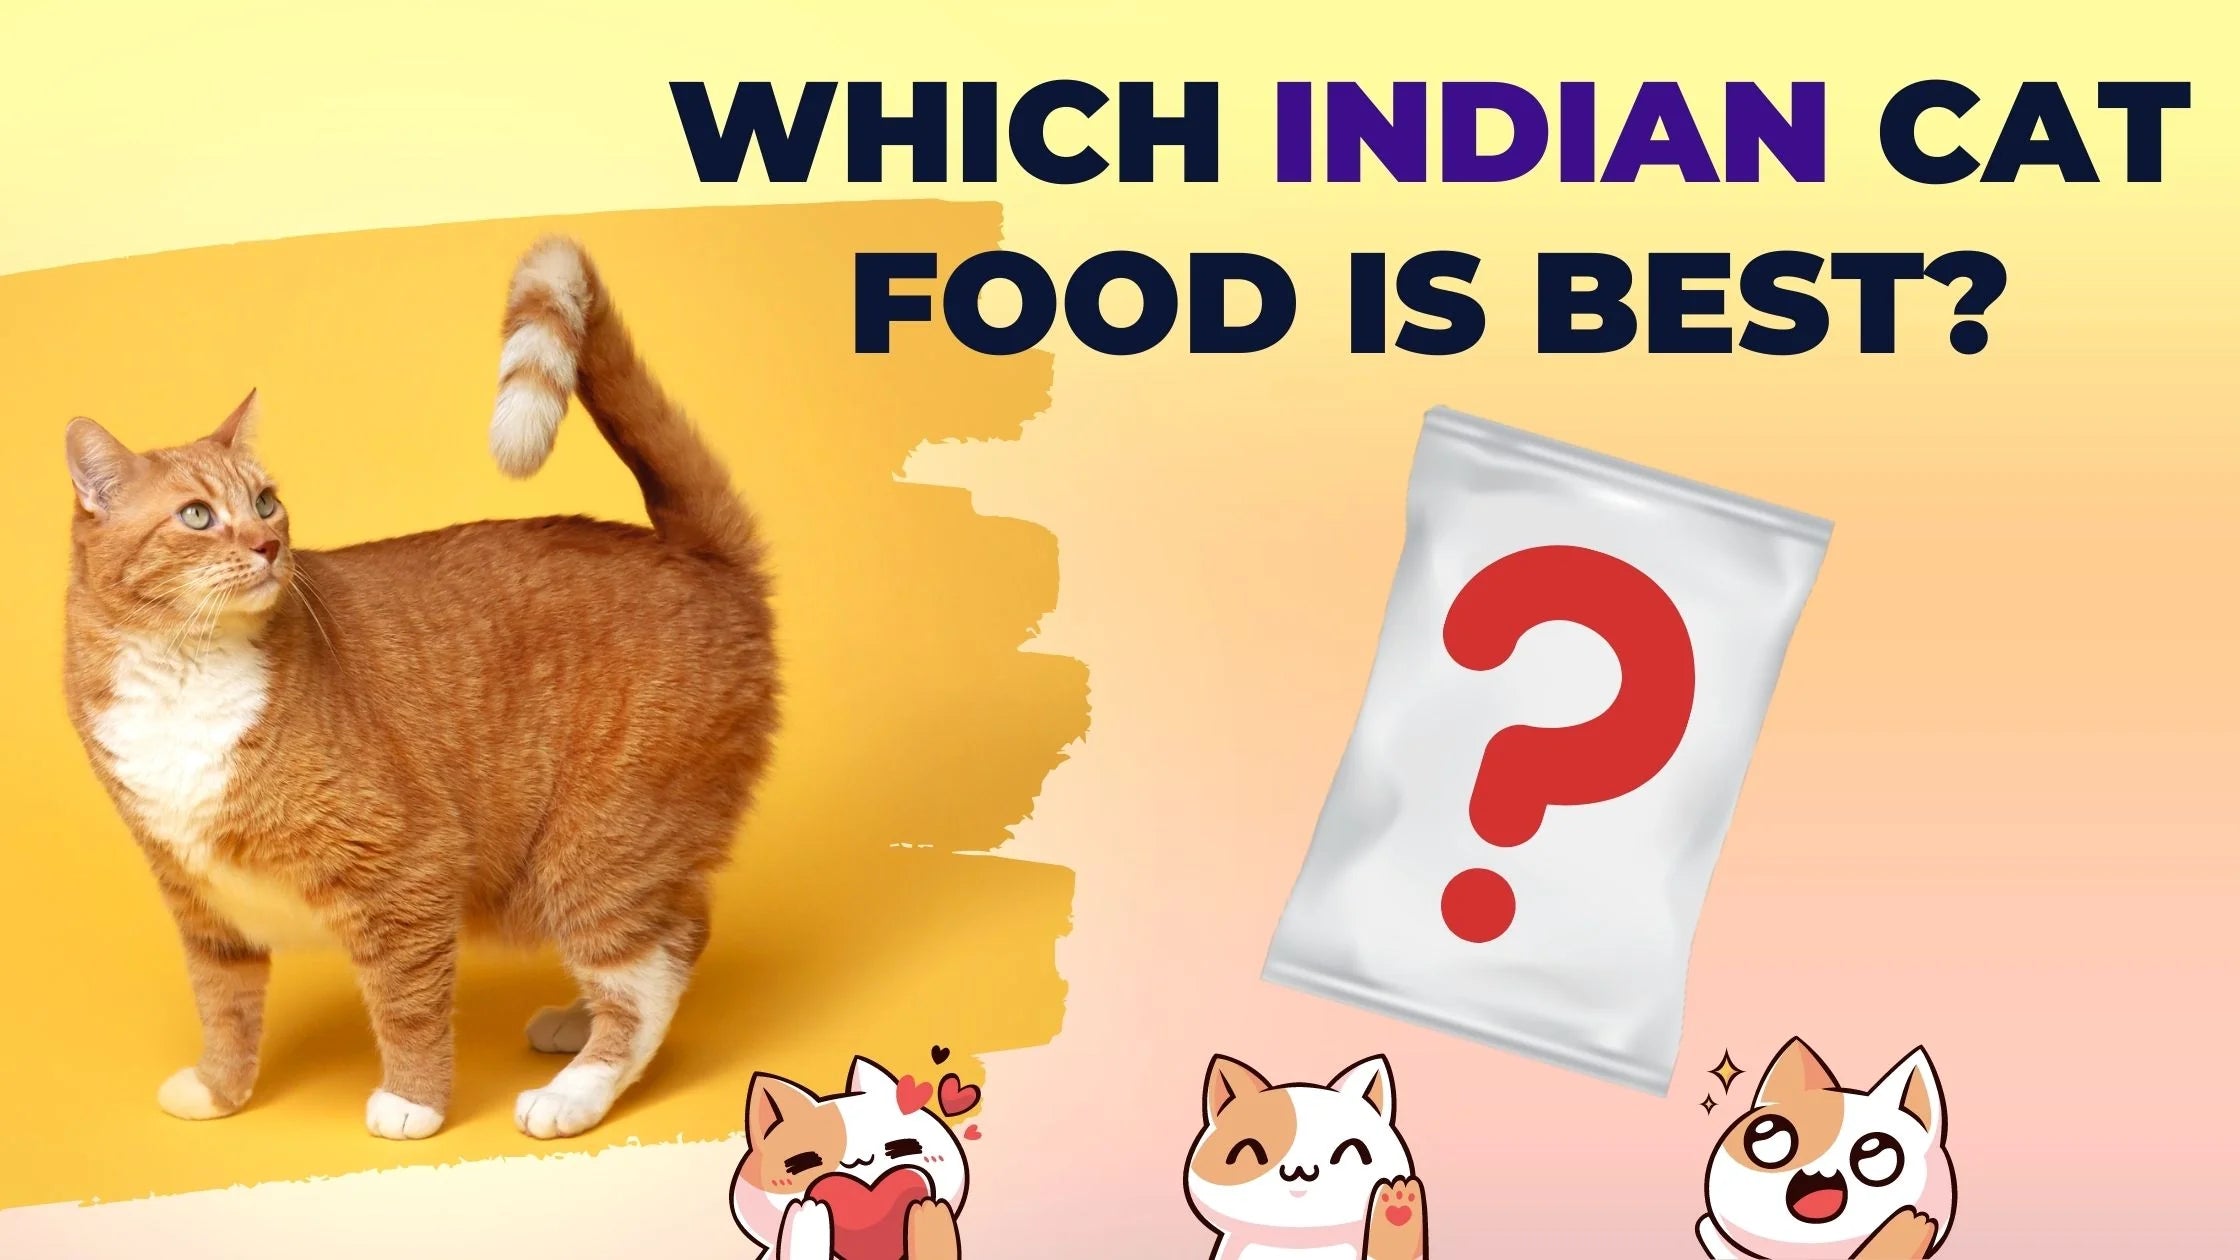 Which Indian cat food is best?